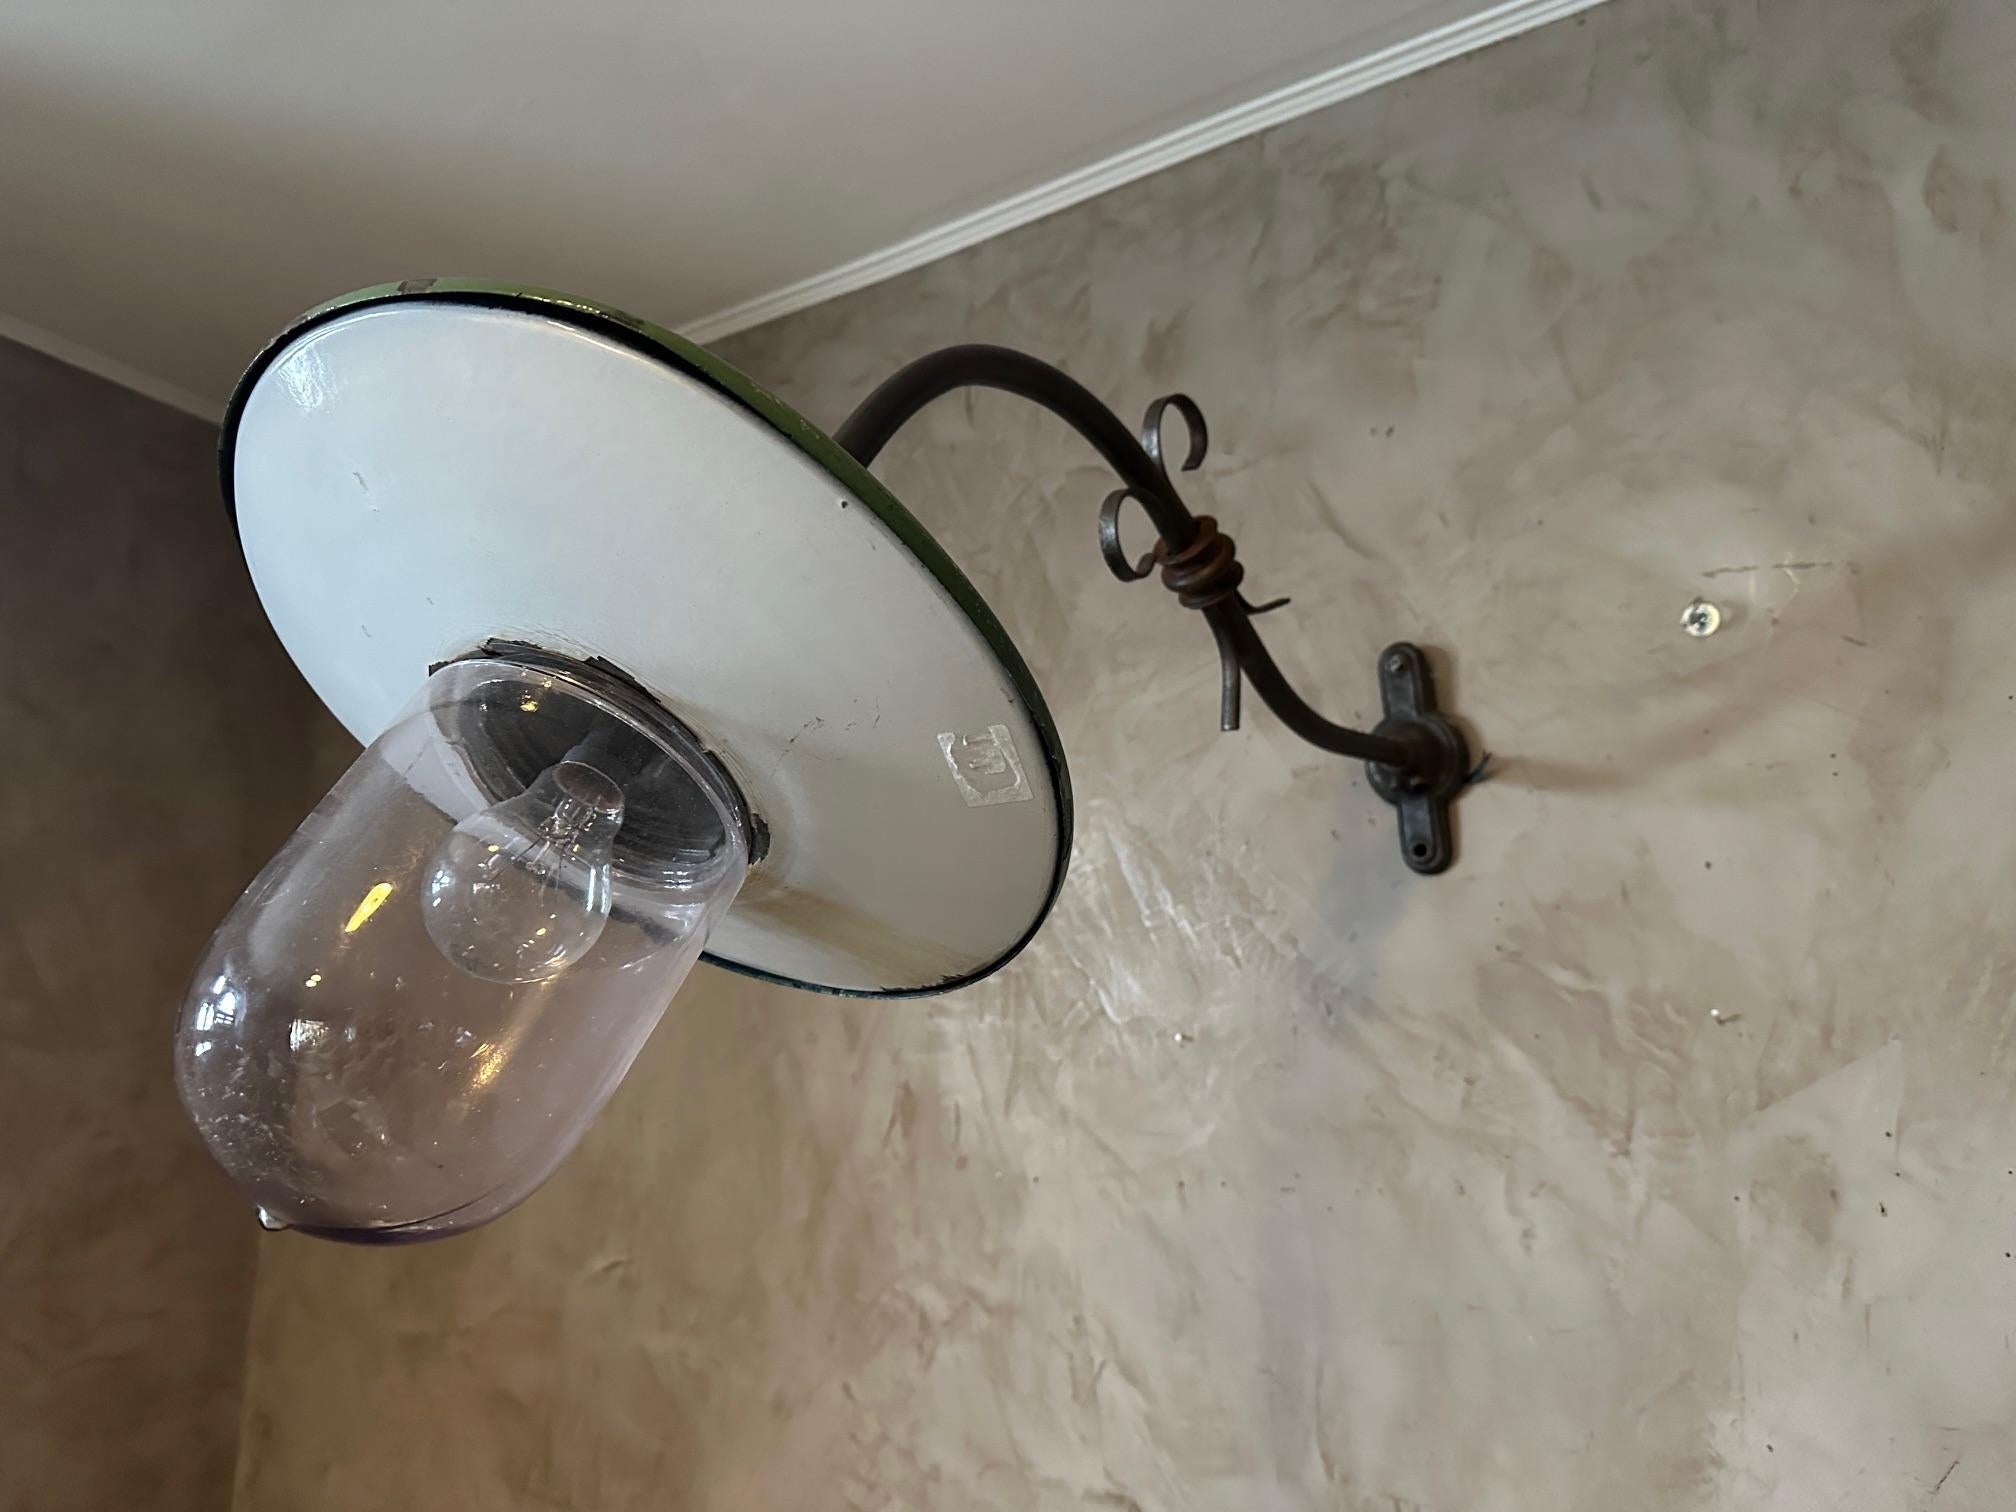 Beautiful outdoor metal wall light from the 1920s, industrial style, swan neck.
Lampshade in green enameled sheet metal. Gag bulb. 
Electrification up to standards.